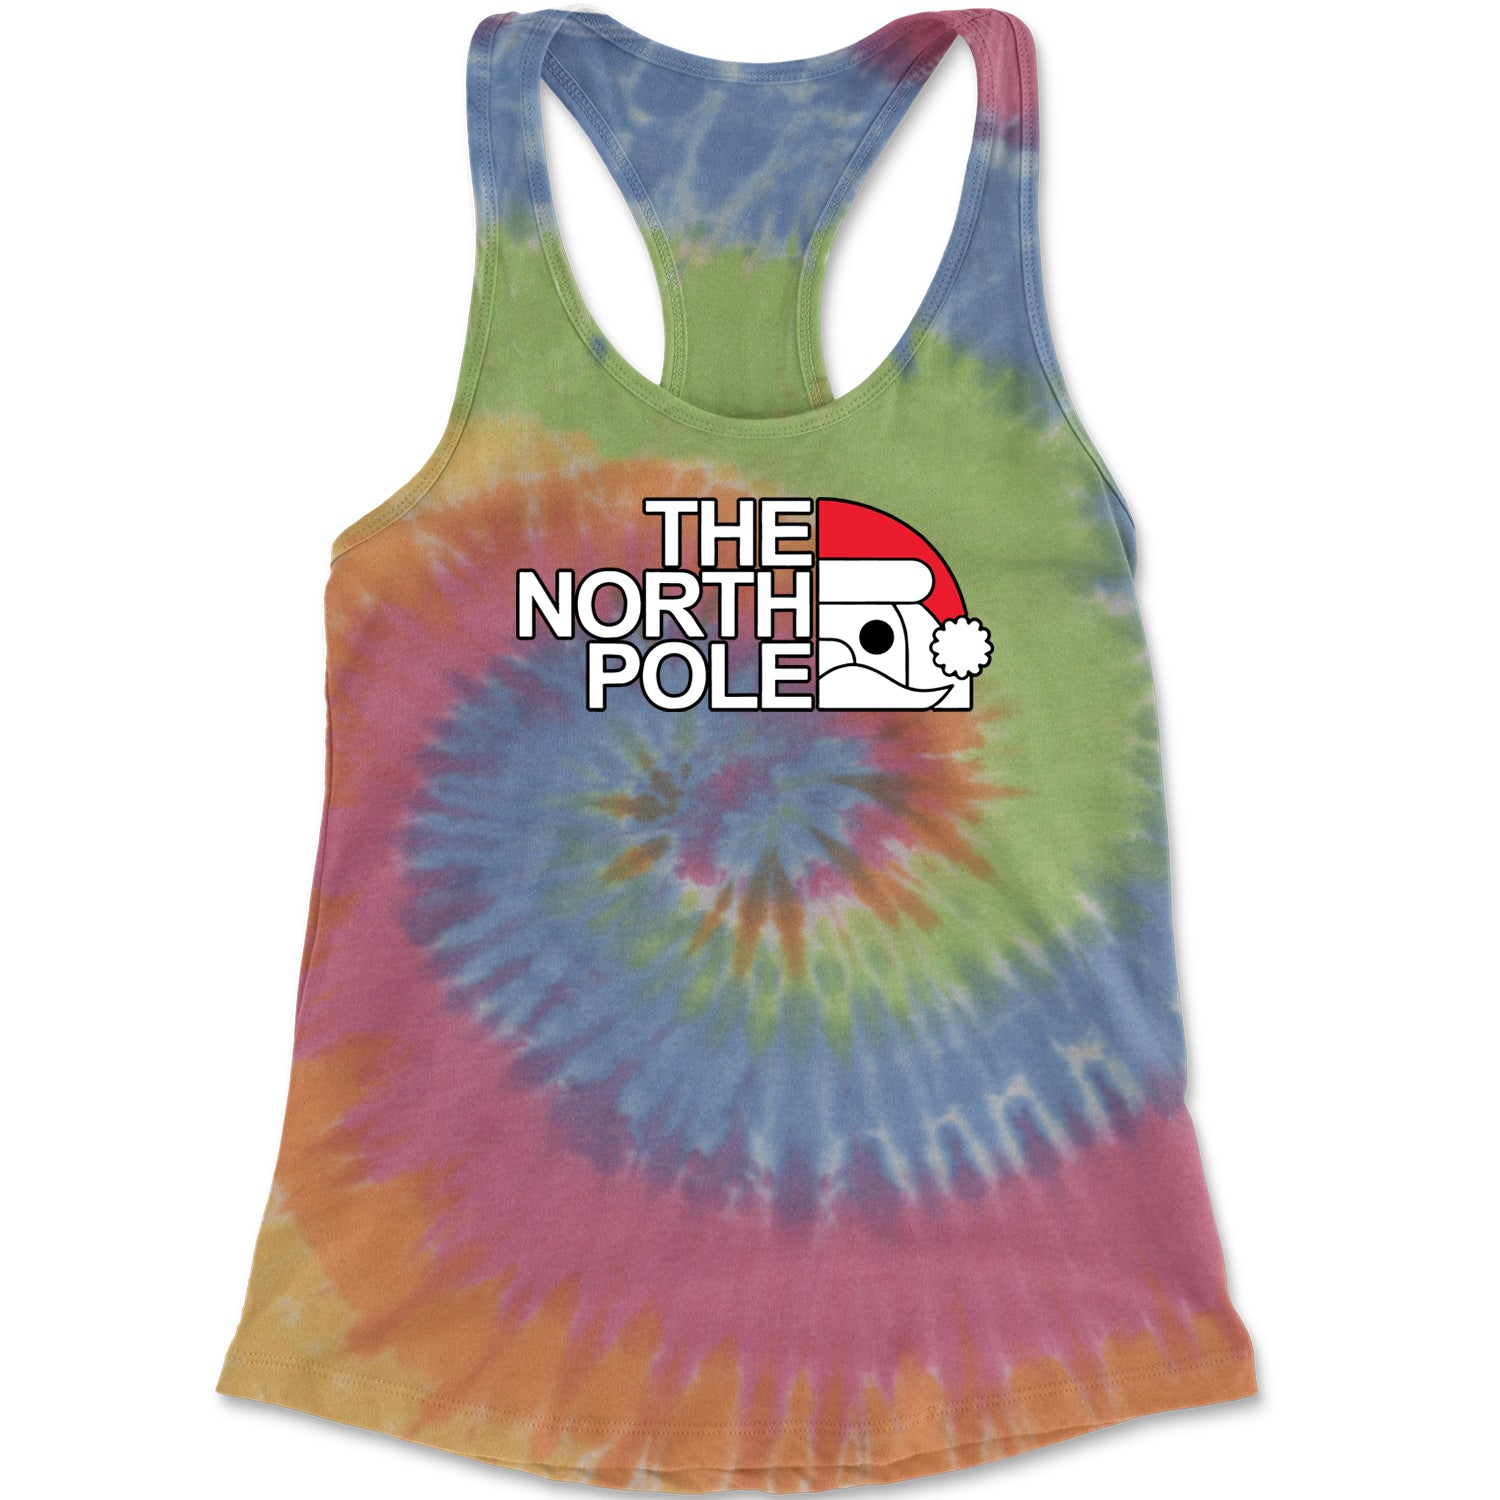 The North Pole Santa Racerback Tank Top for Women christmas, funny, nick, old, santa, st, xmas by Expression Tees